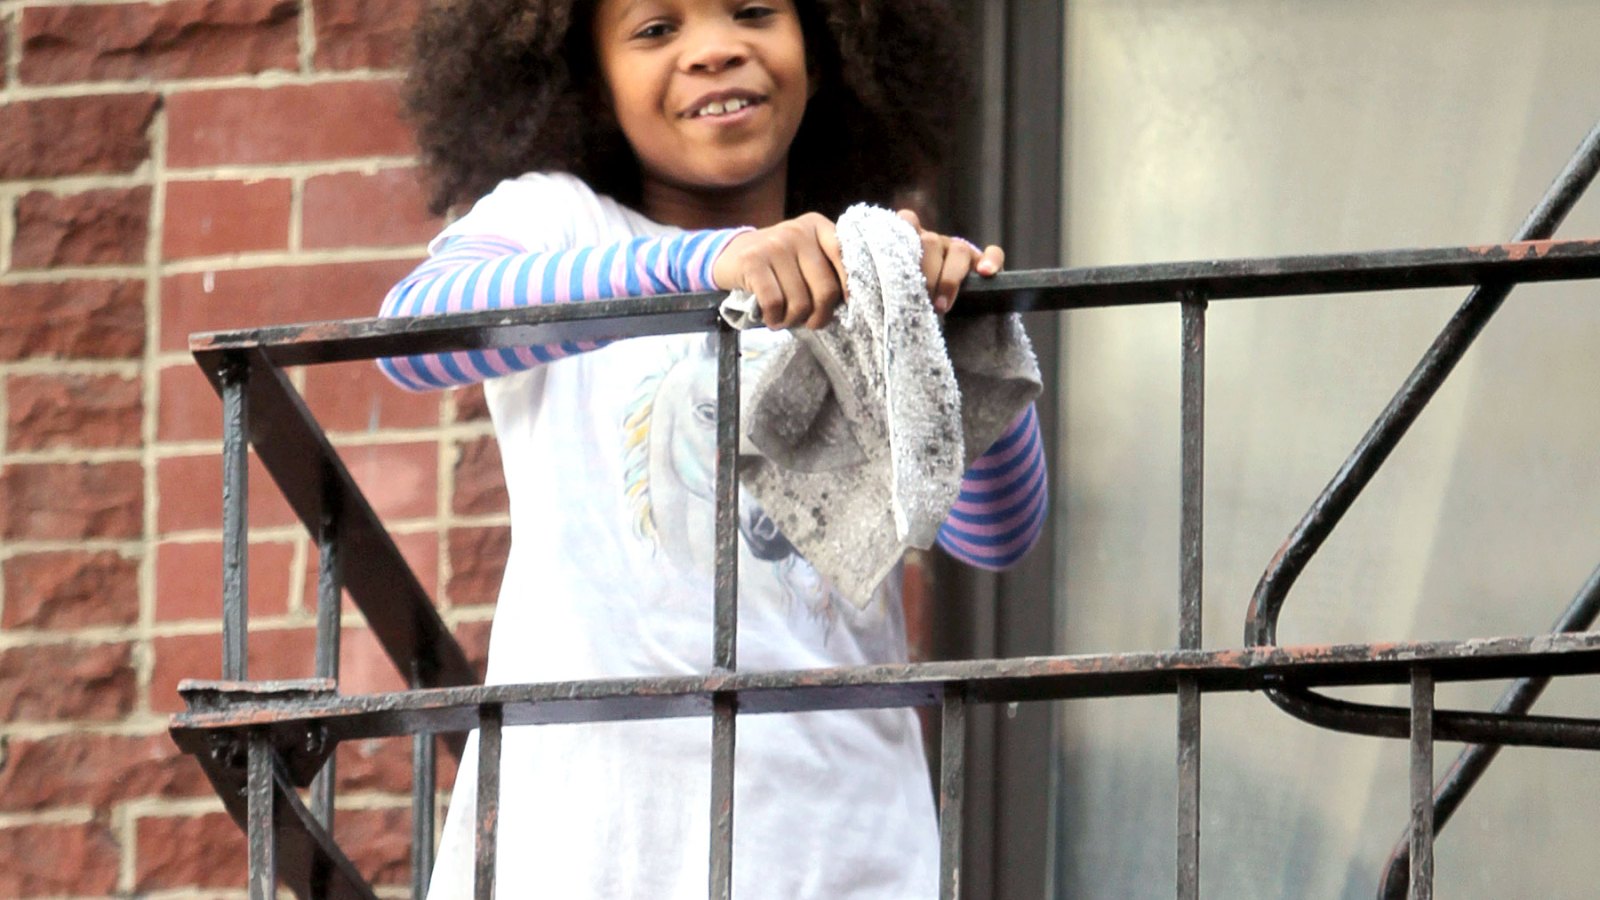 Quvenzhane Wallis on the set of "Annie" on Nov. 16, 2013 in NYC